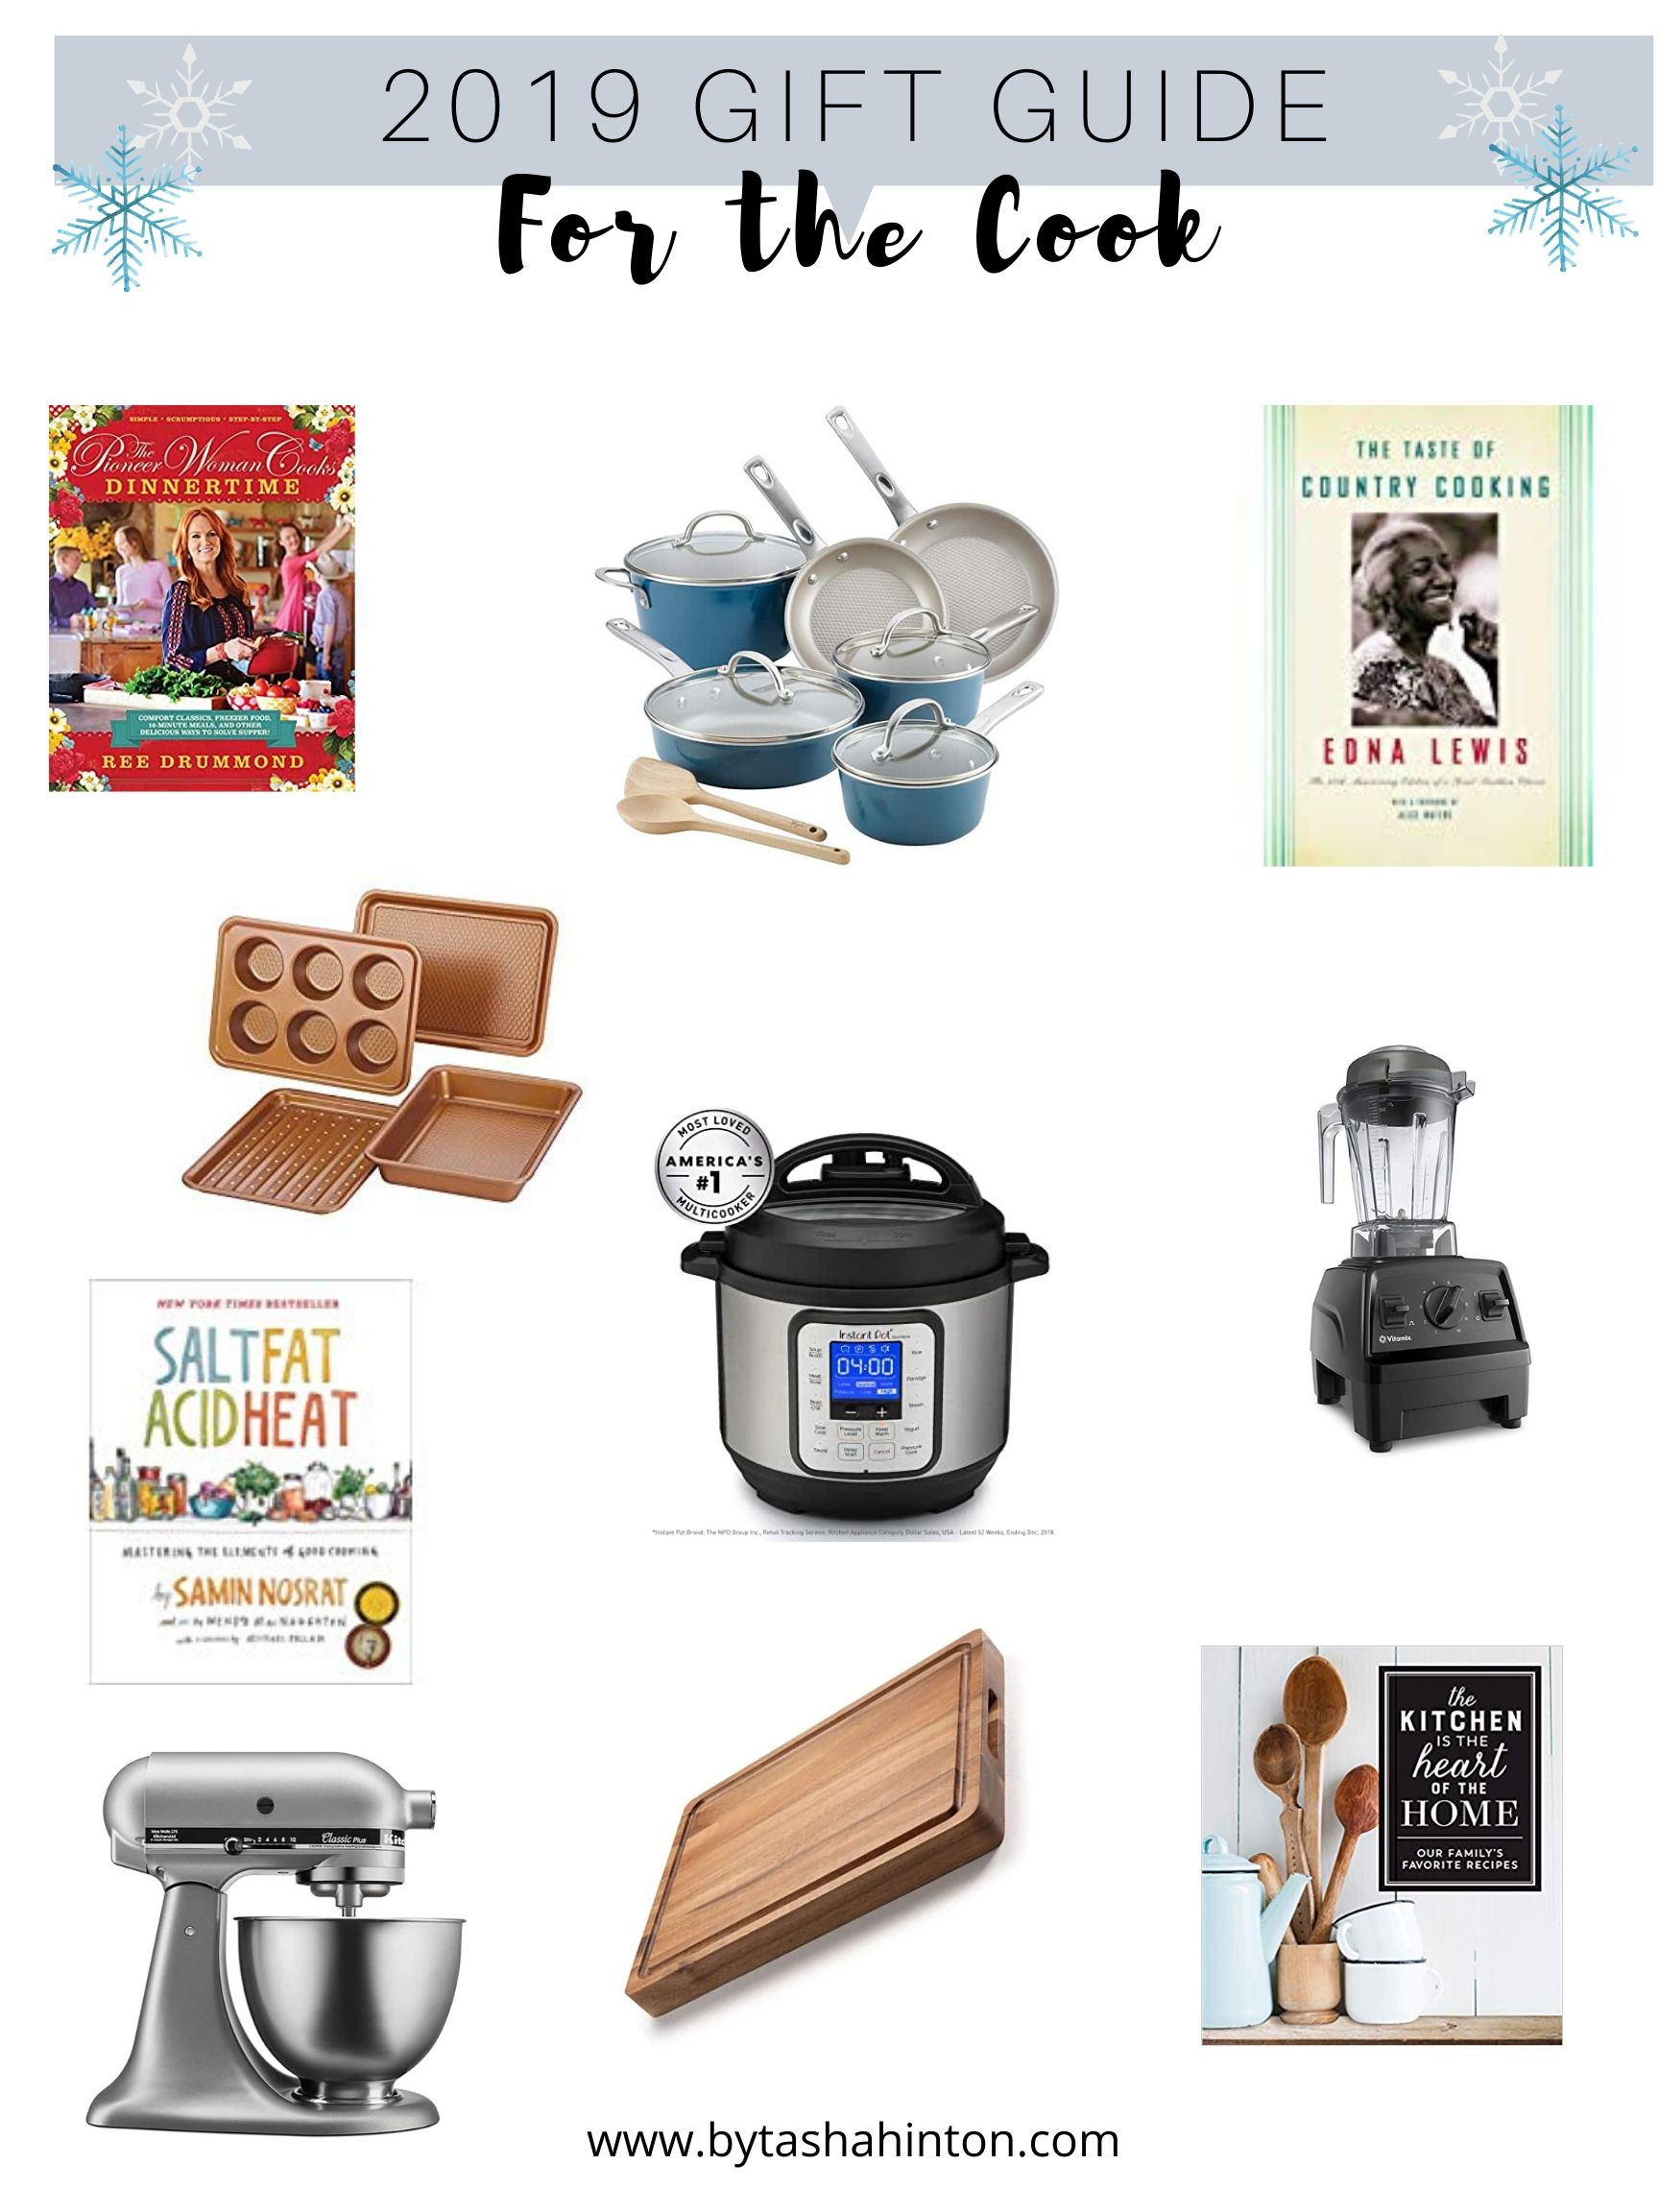 https://bytashahinton.com/wp-content/uploads/2019/11/2019-GIFT-GUIDE-for-the-cook1.jpg